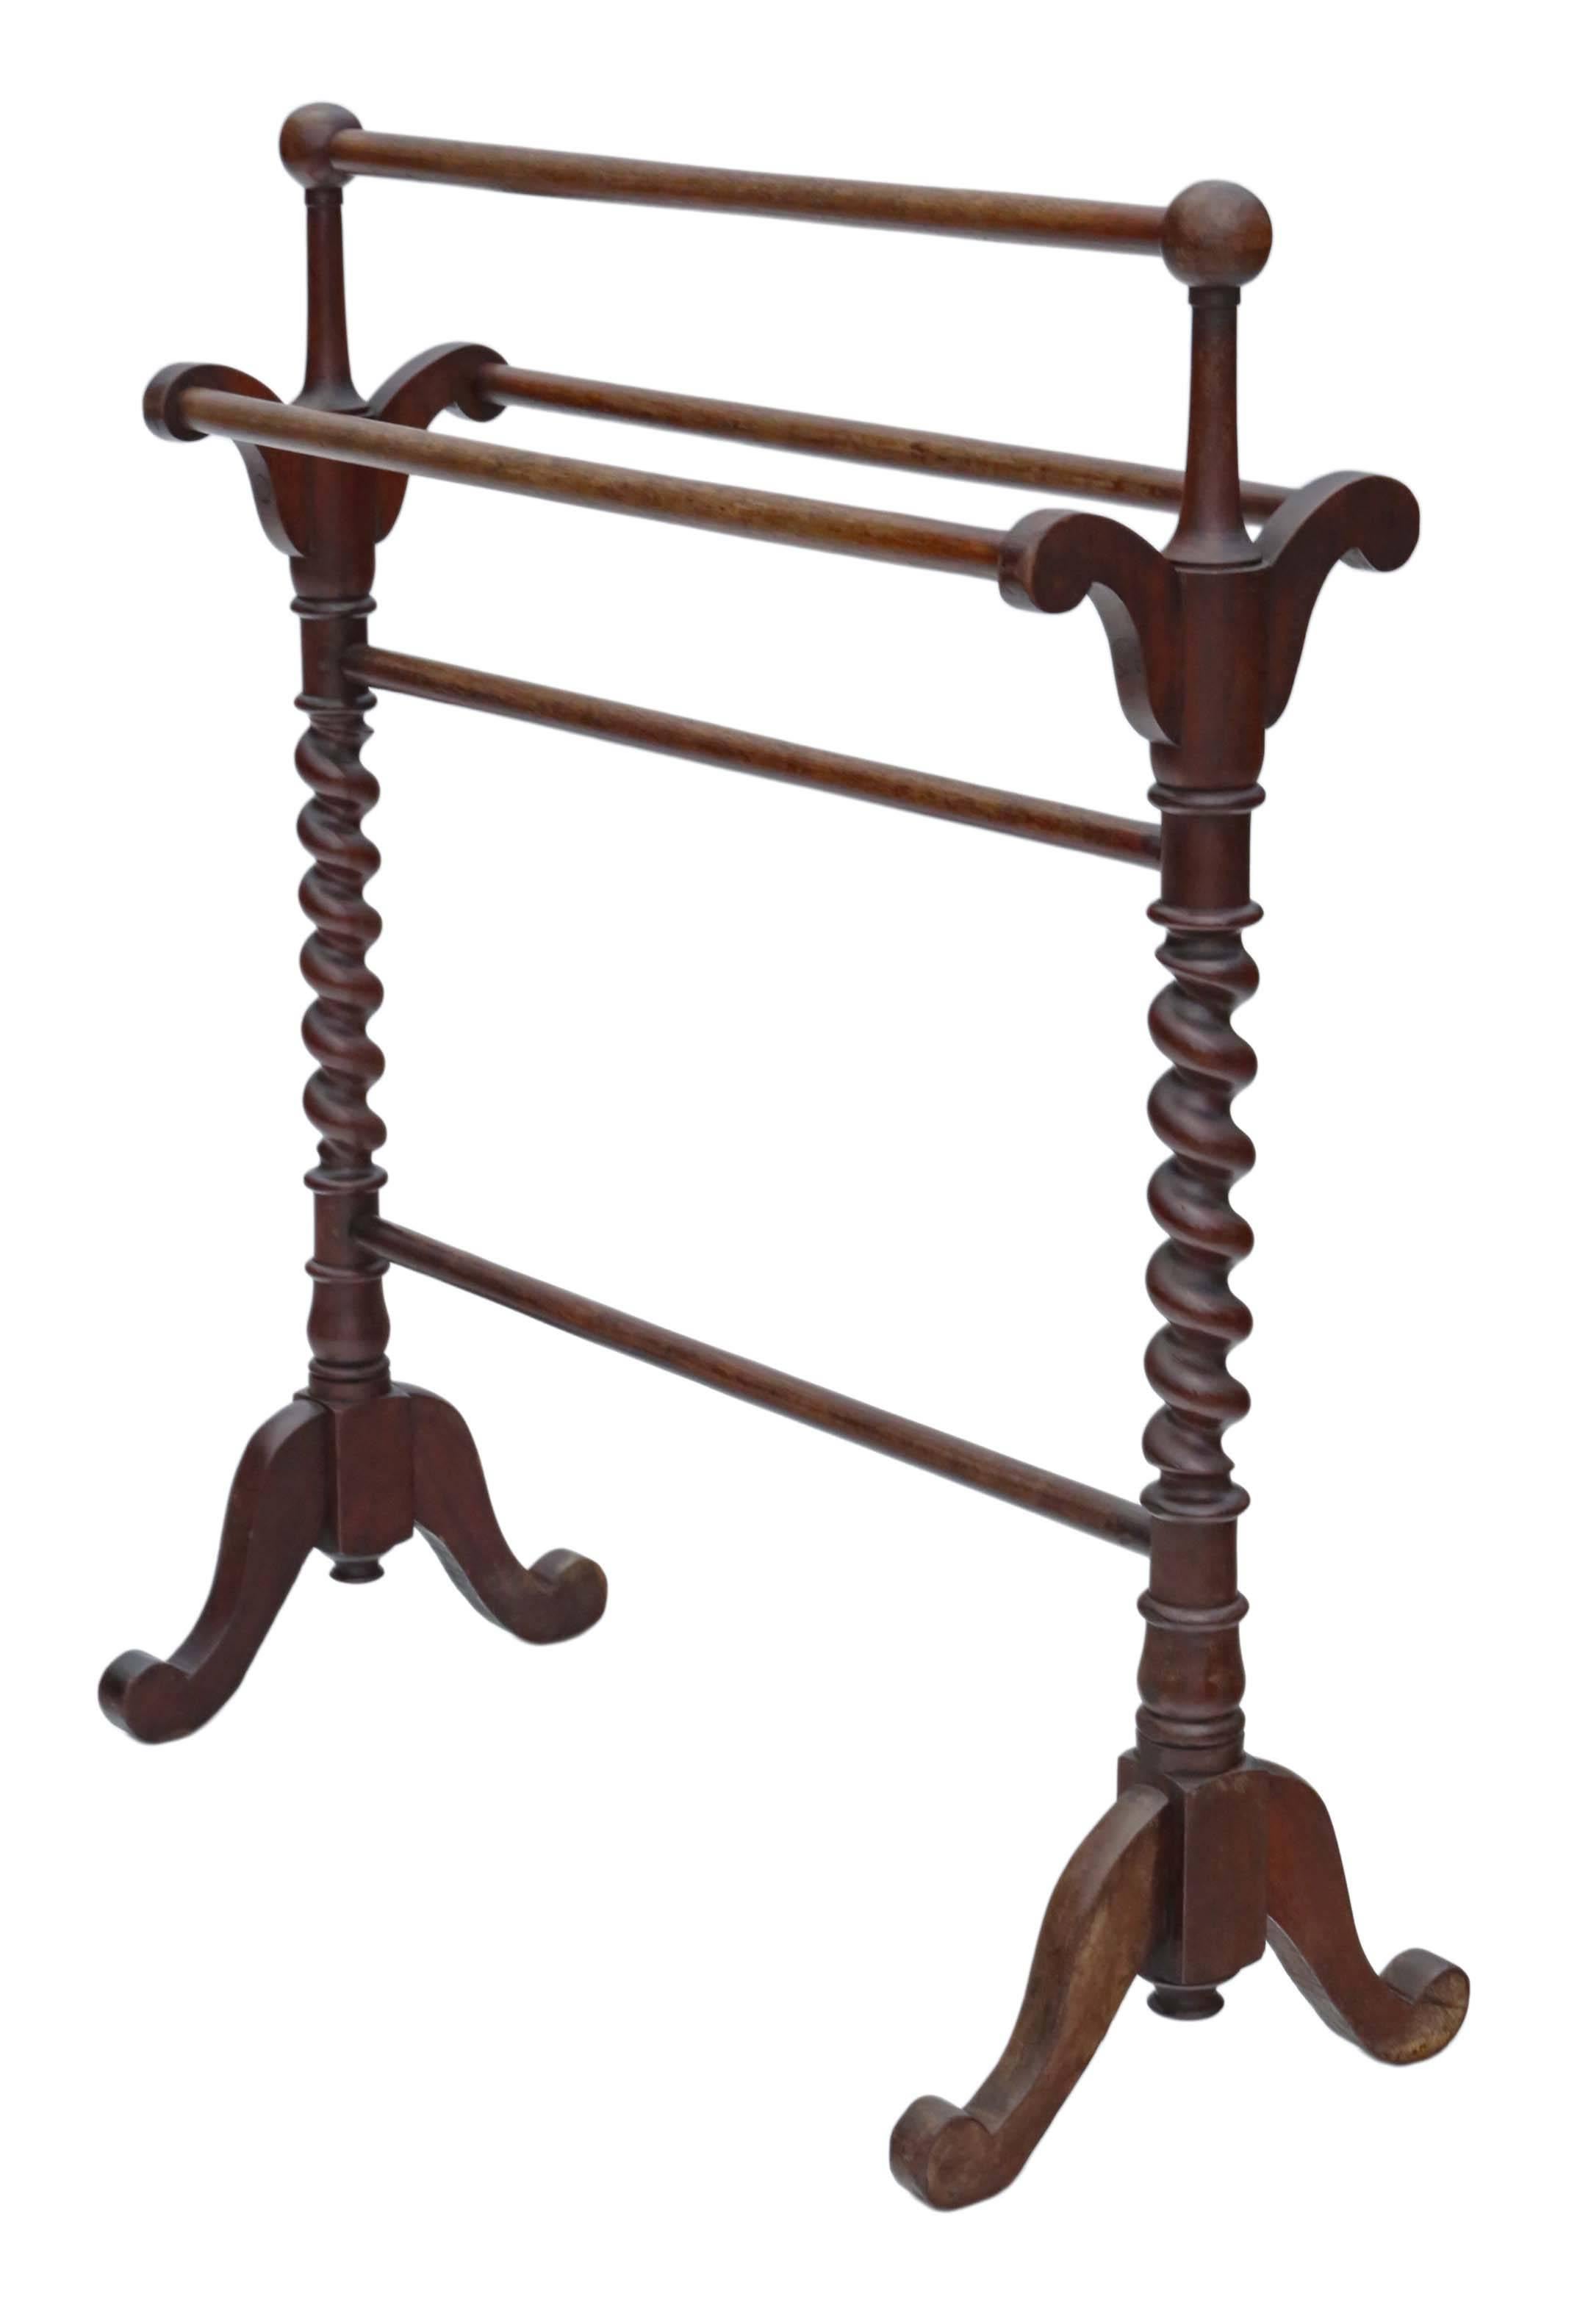 Antique quality Victorian circa 1885 mahogany towel rail stand. Much better than most, with lovely twist uprights.

This item is solid and strong, with no loose joints.

No woodworm.

Good age and patina, would look amazing in the right